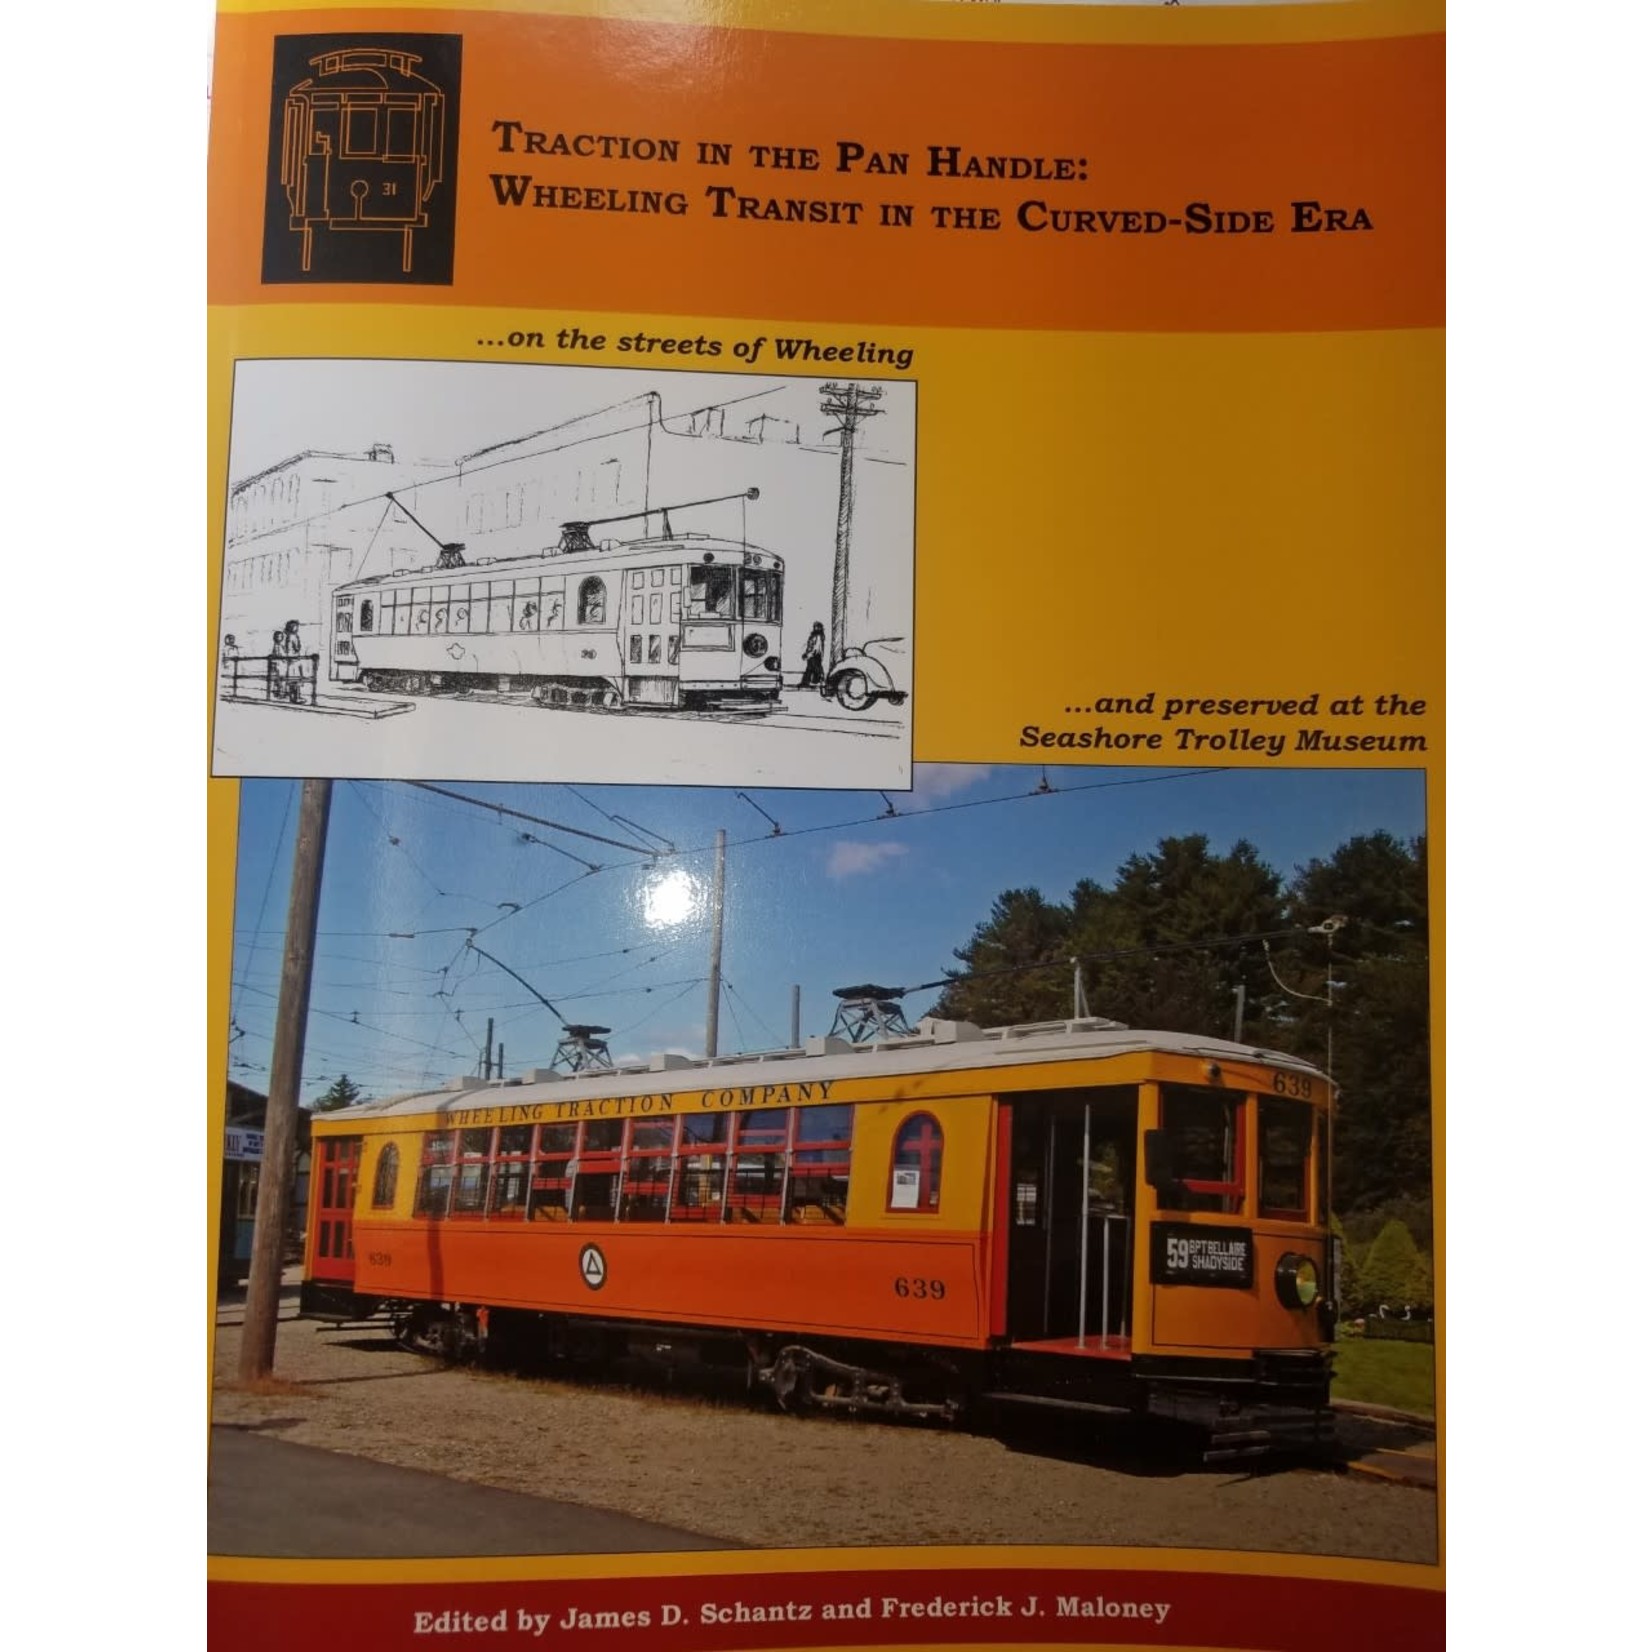 Traction in the Pan Handle:  Wheeling Transit in the Curved-Side Era (Fund 876)